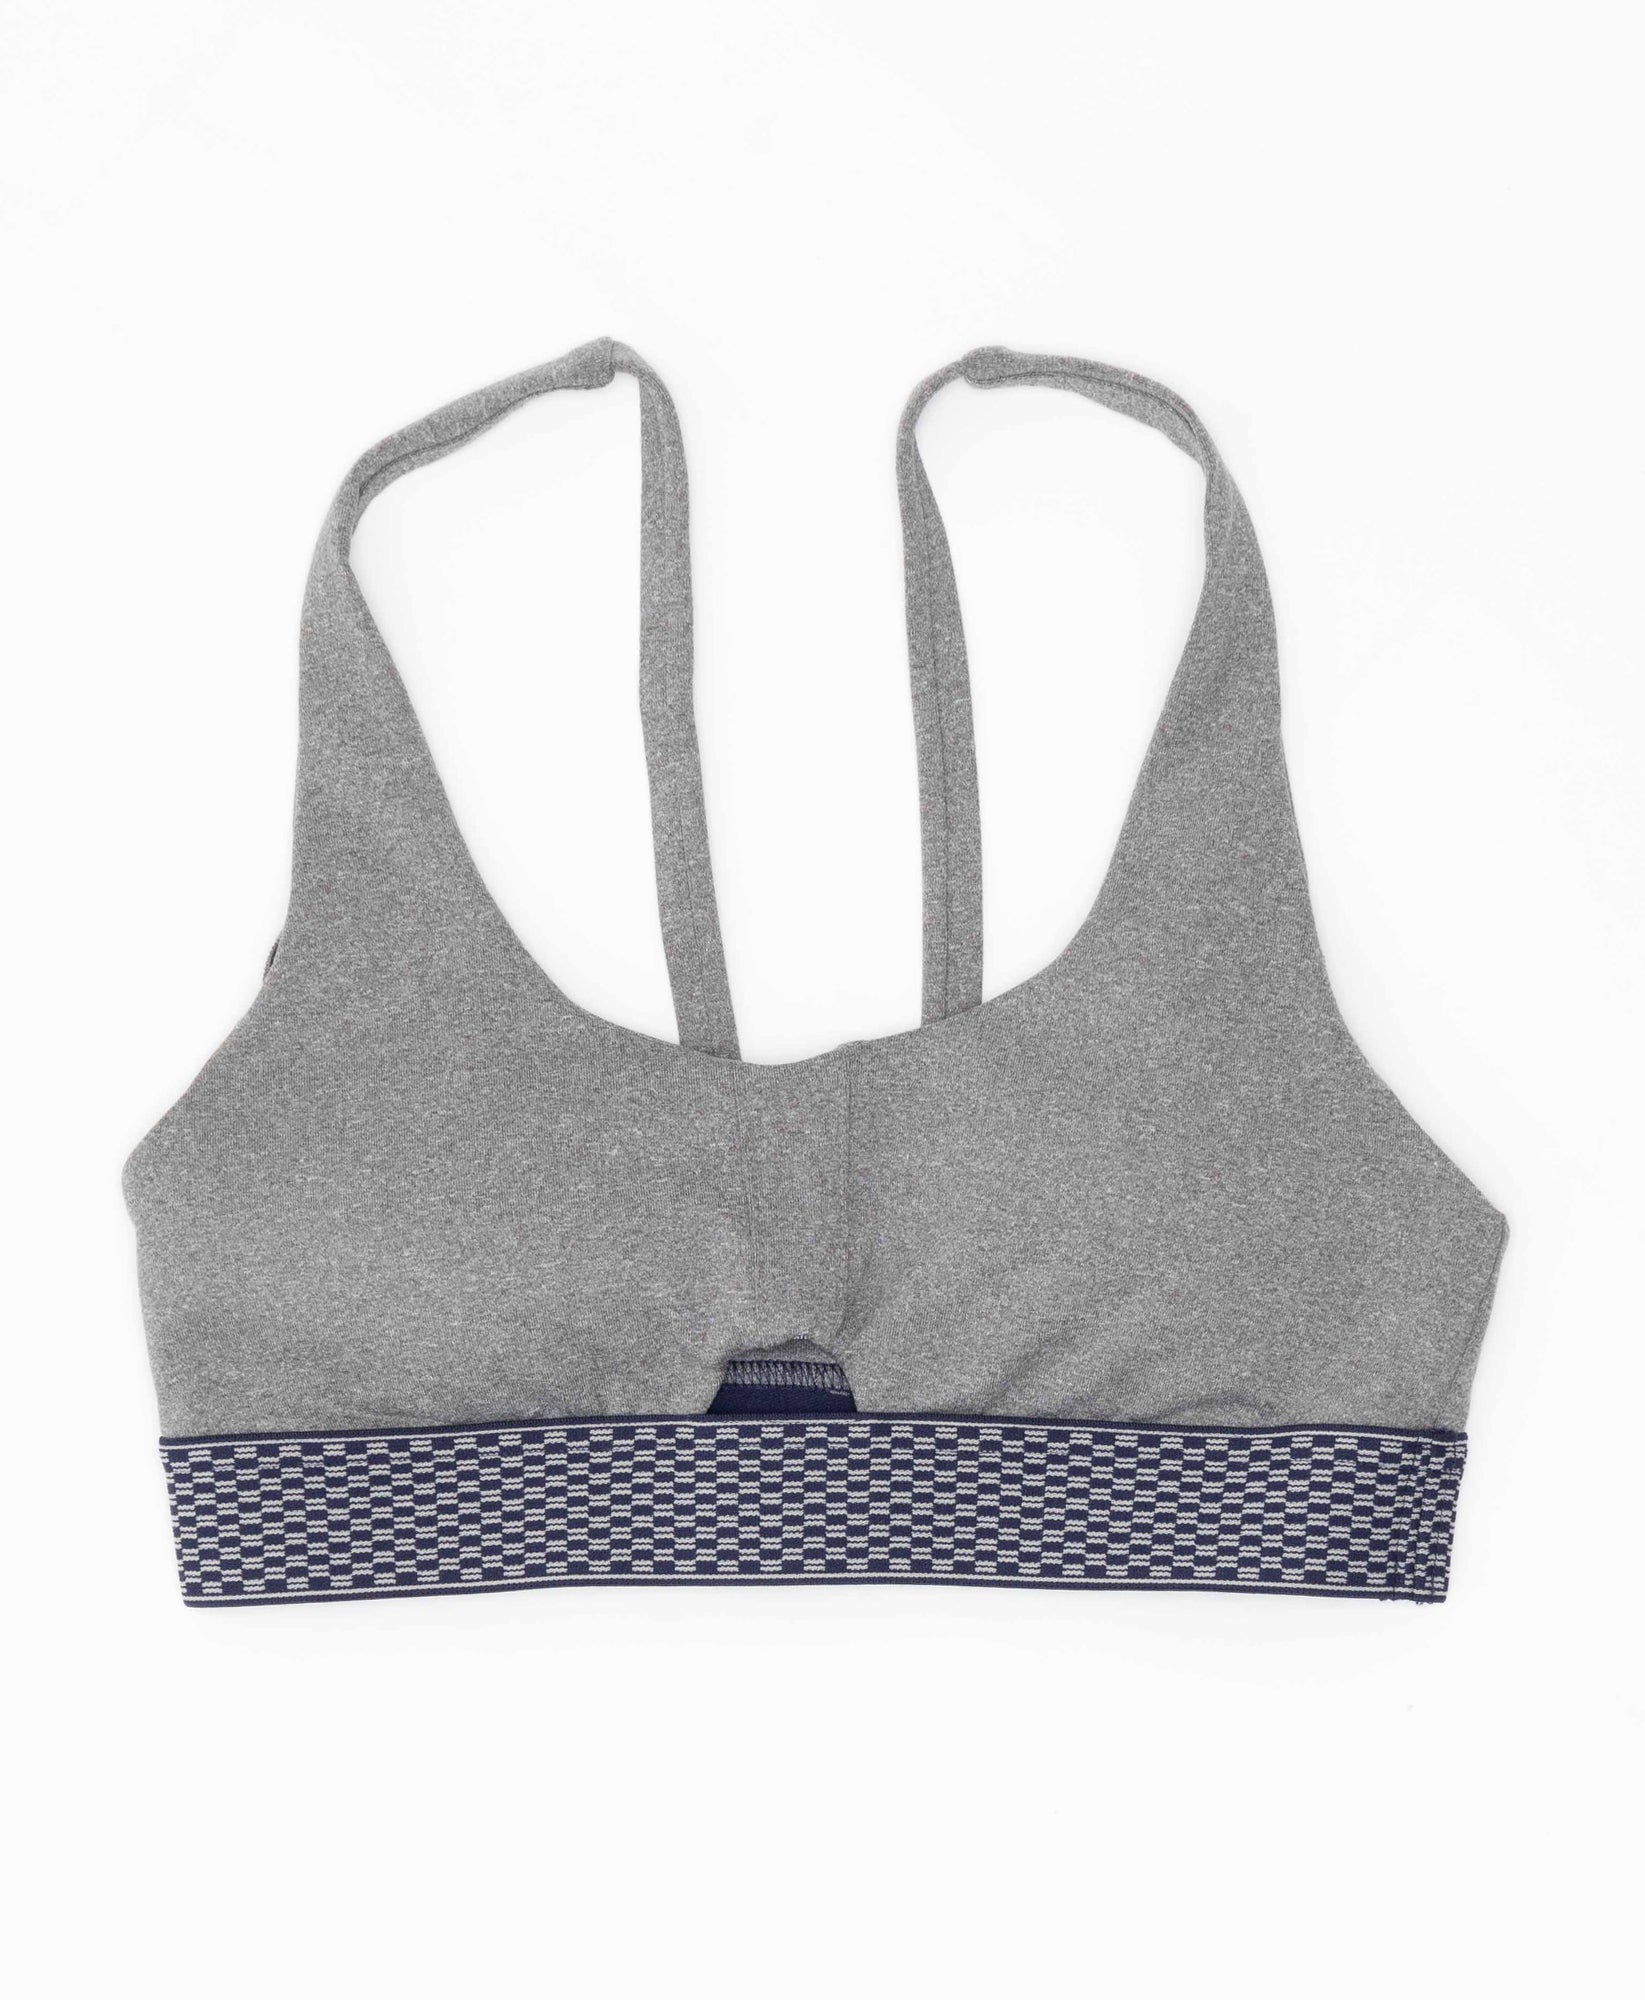 Wear One's At Keyhole Bra in Sport Grey on Model Front View